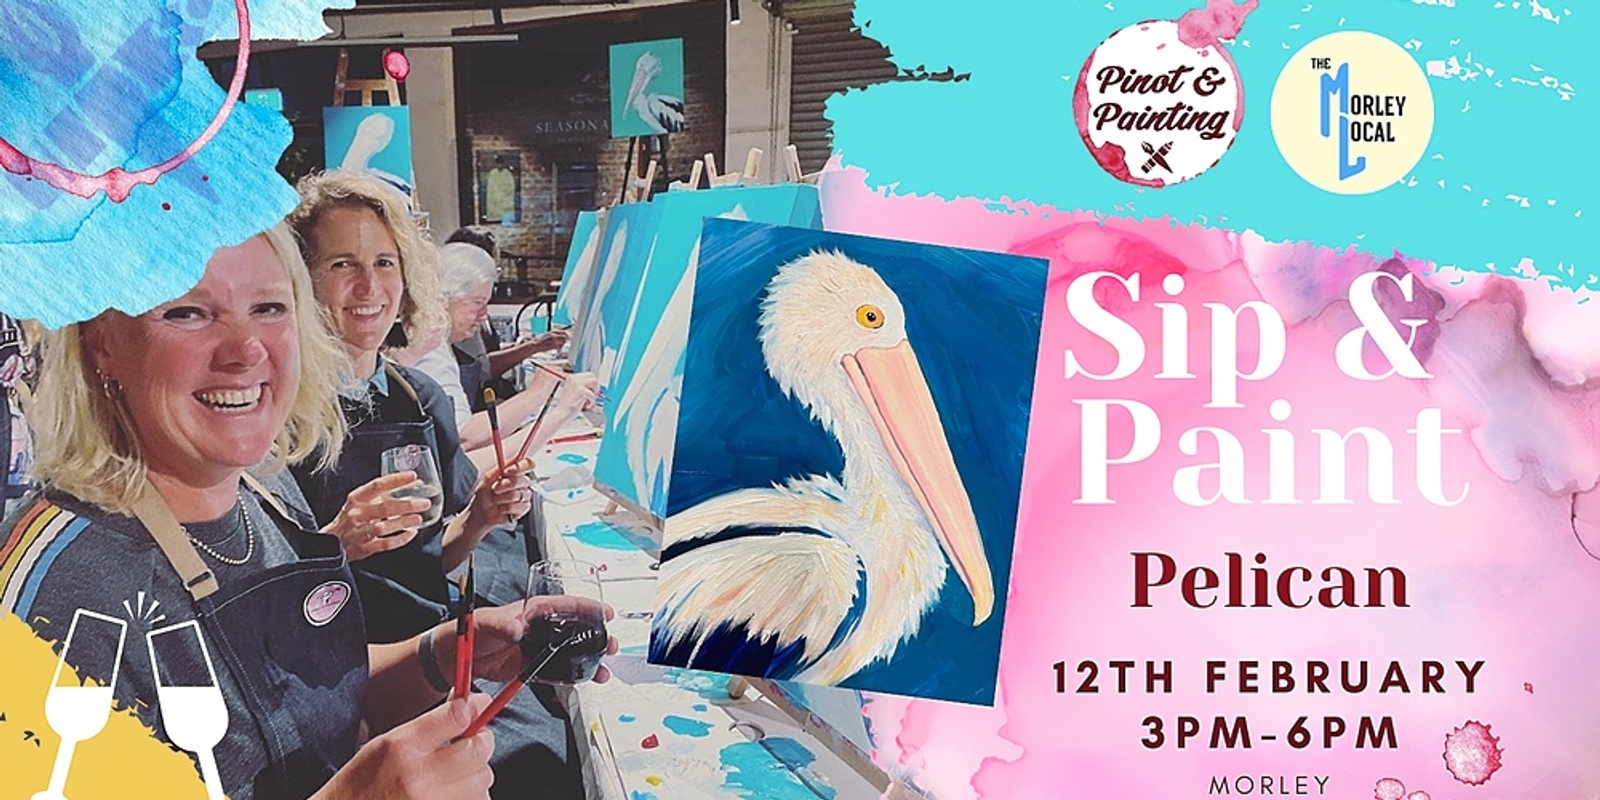 Banner image for Pelican Painting - Girls Day Out @ Morley Local